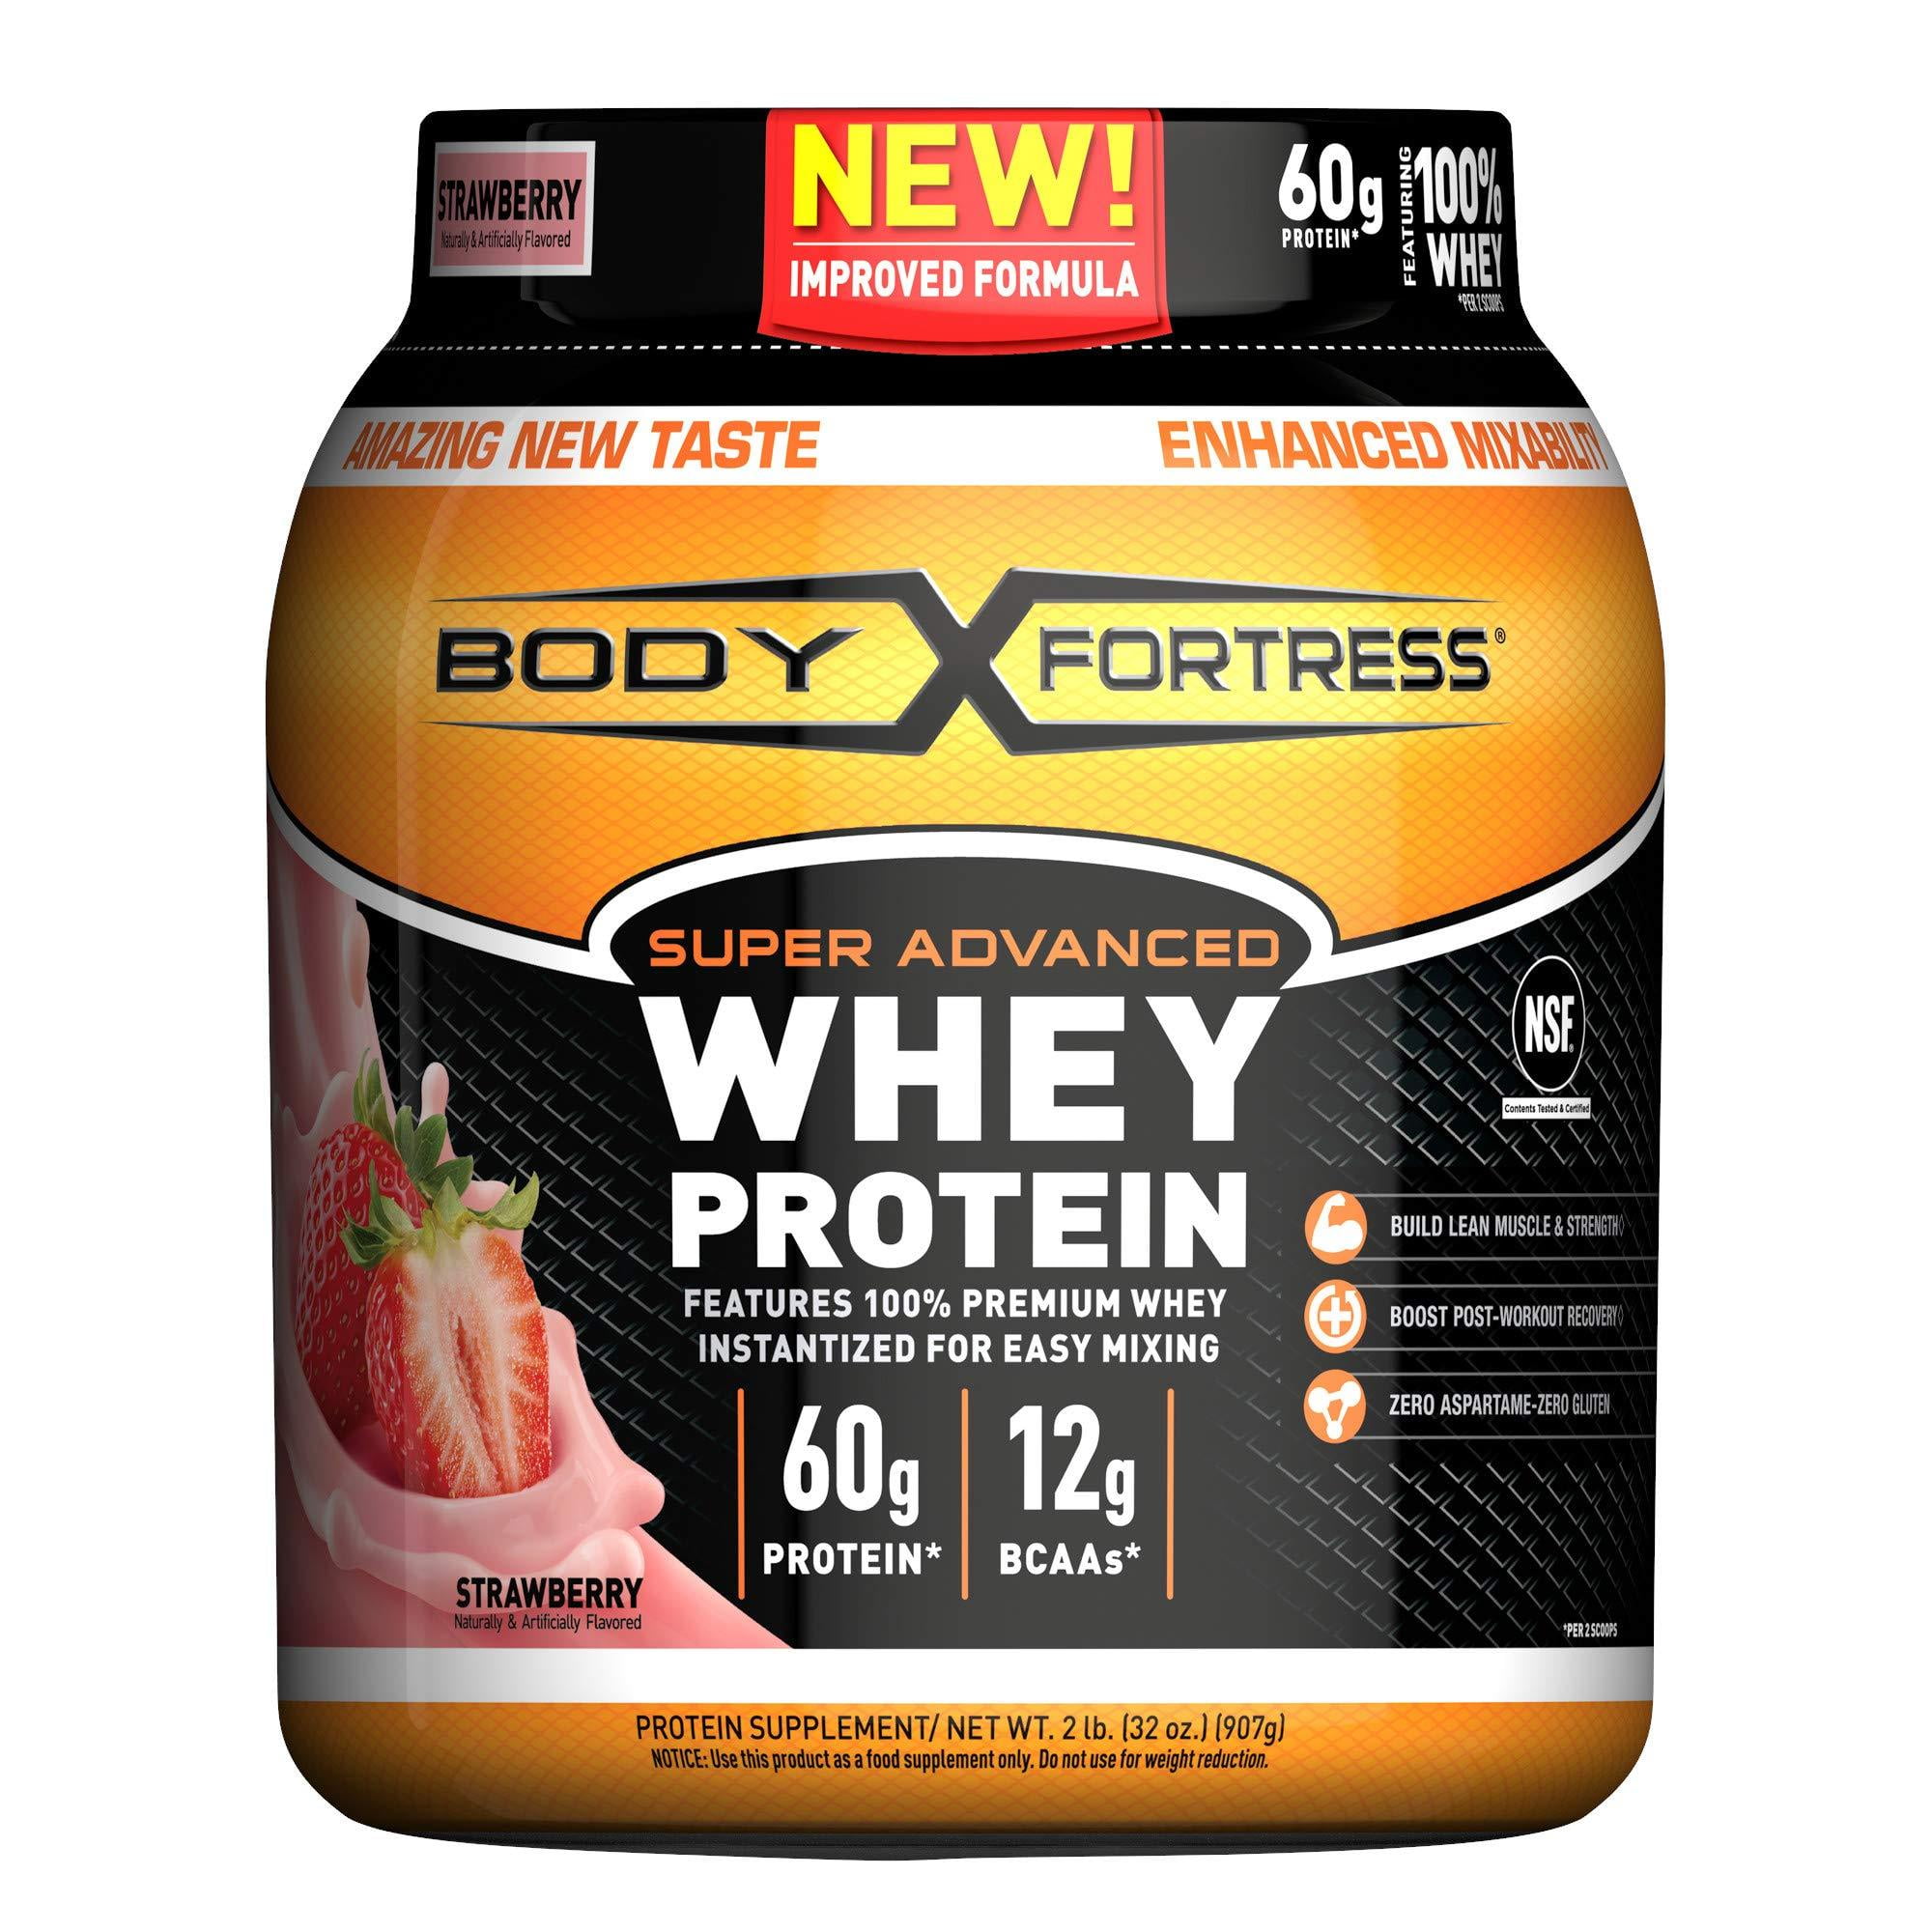 Body Fortress Super Advanced Whey Protein Powder, Gluten Free, Strawberry, 2 Pound (Packaging May Vary) Strawberry, 2lb